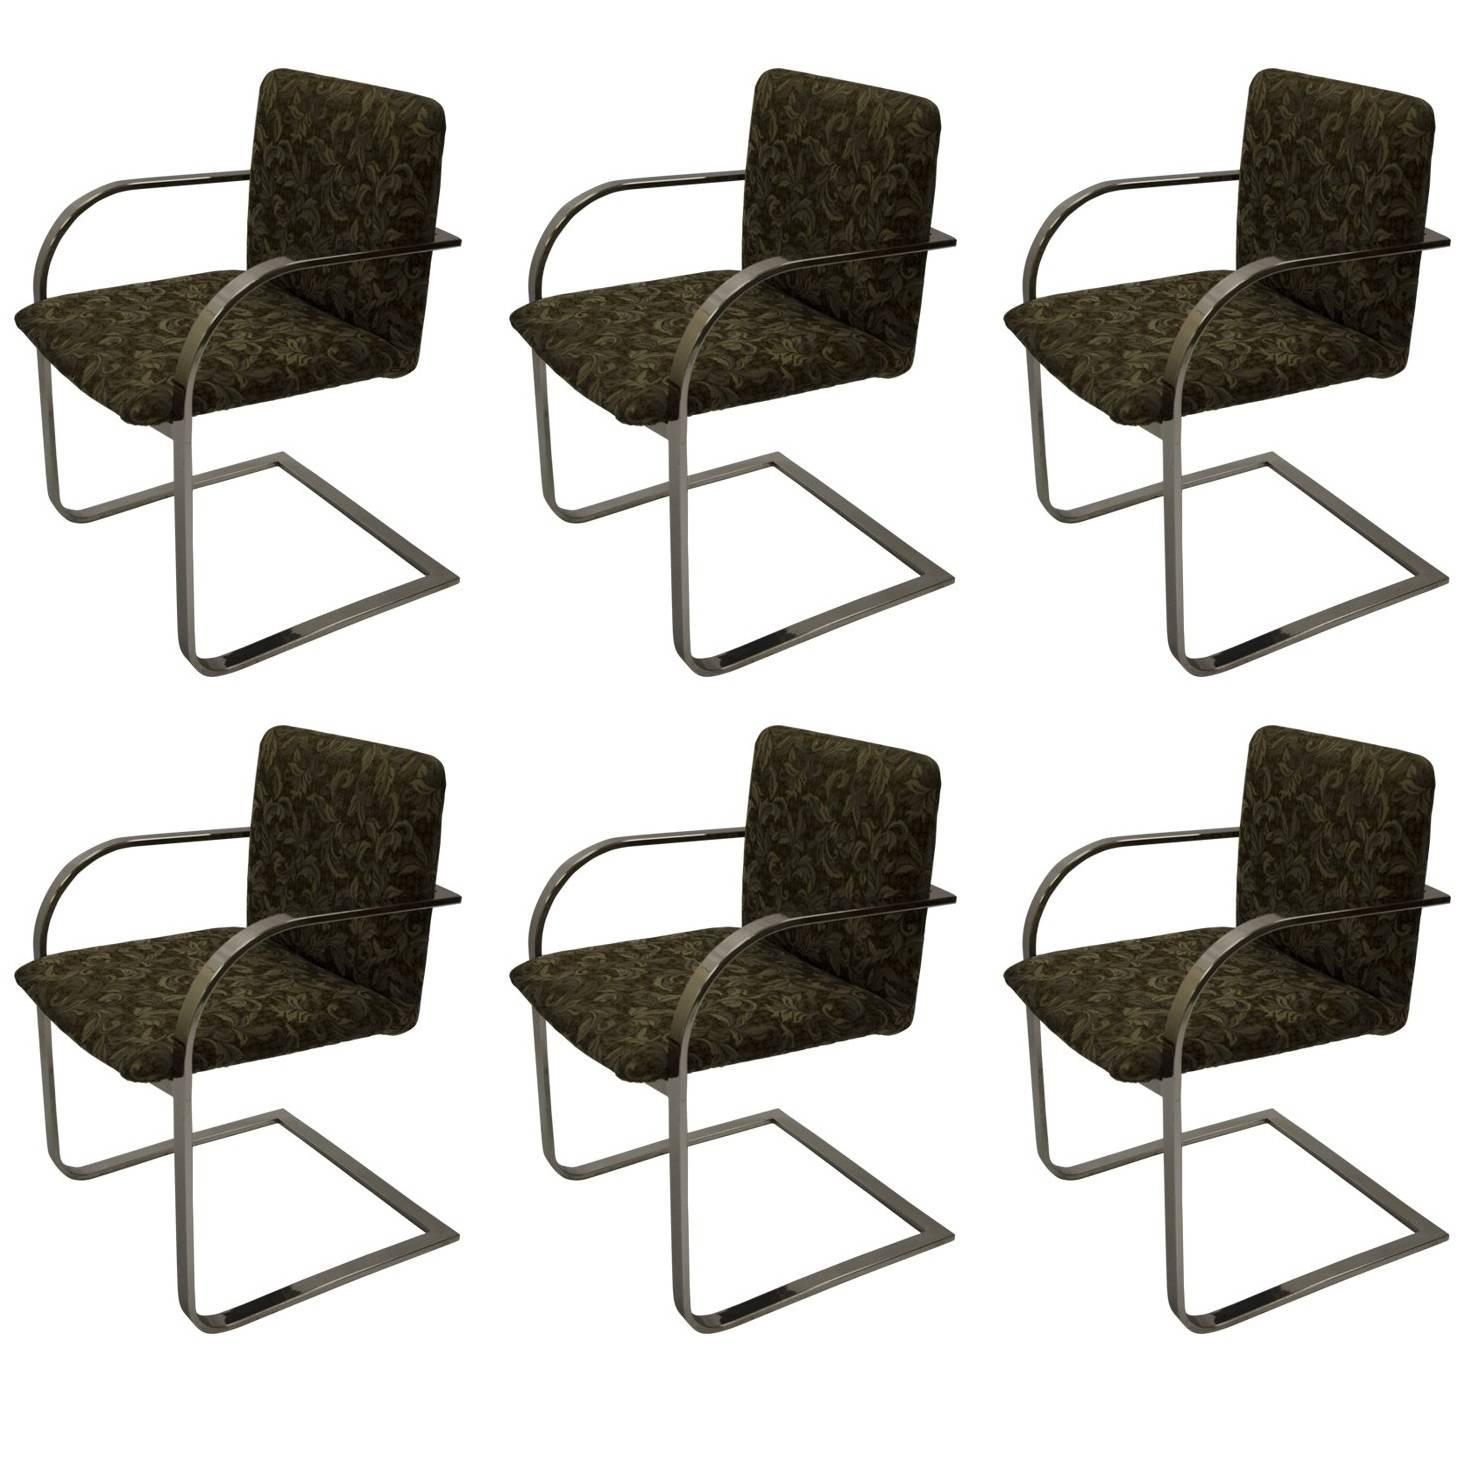 Set of Six Brueton Chrome Armchairs in the style of the Brno Chair